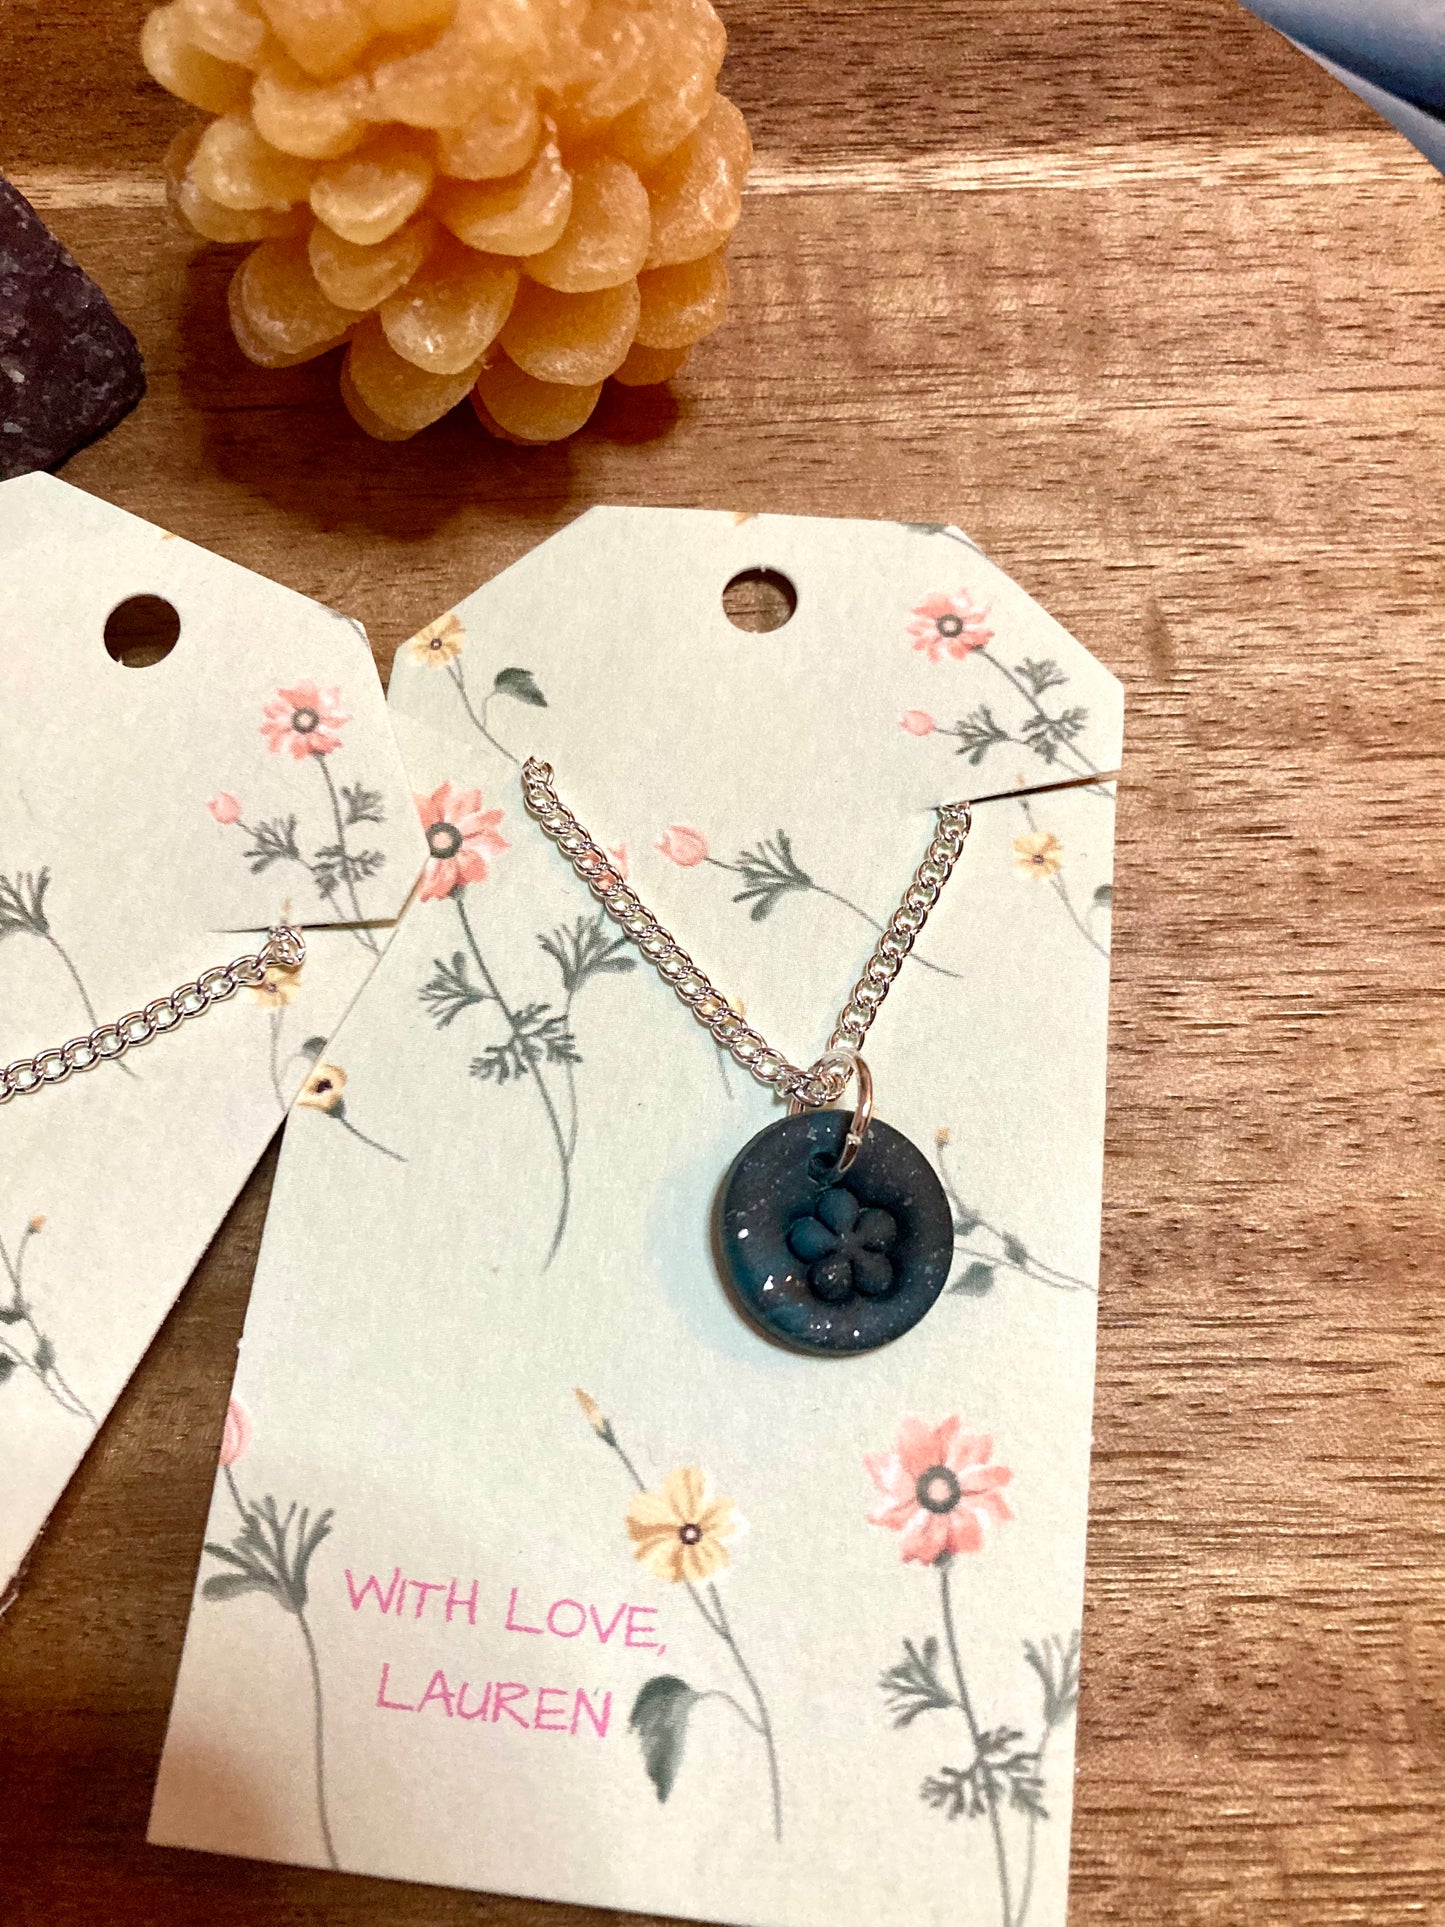 The flower power necklace